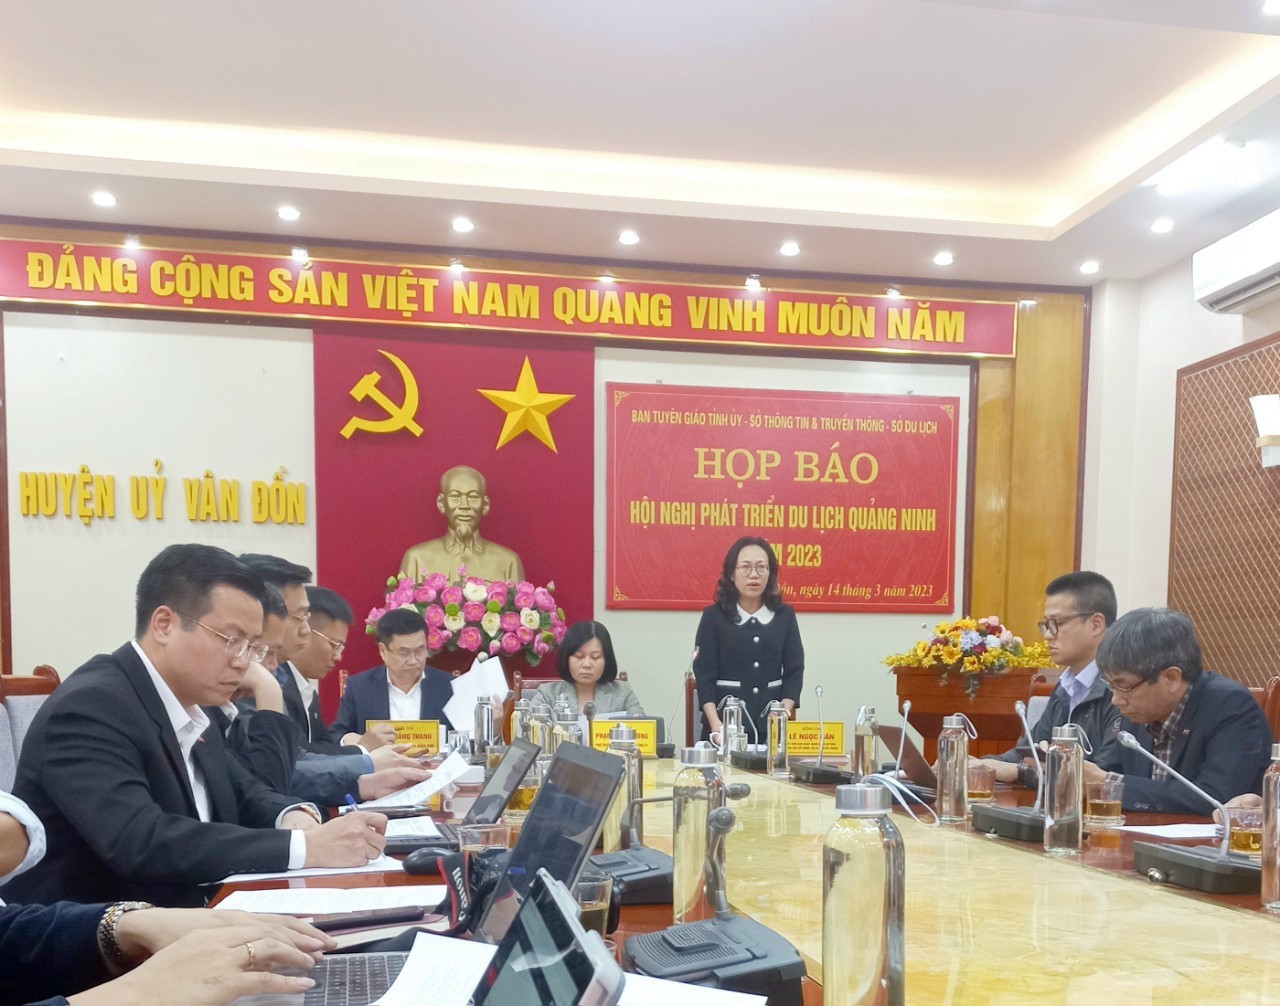 Quang Ninh province held a press conference on the organization of the Quang Ninh Tourism Development Conference in 2023.